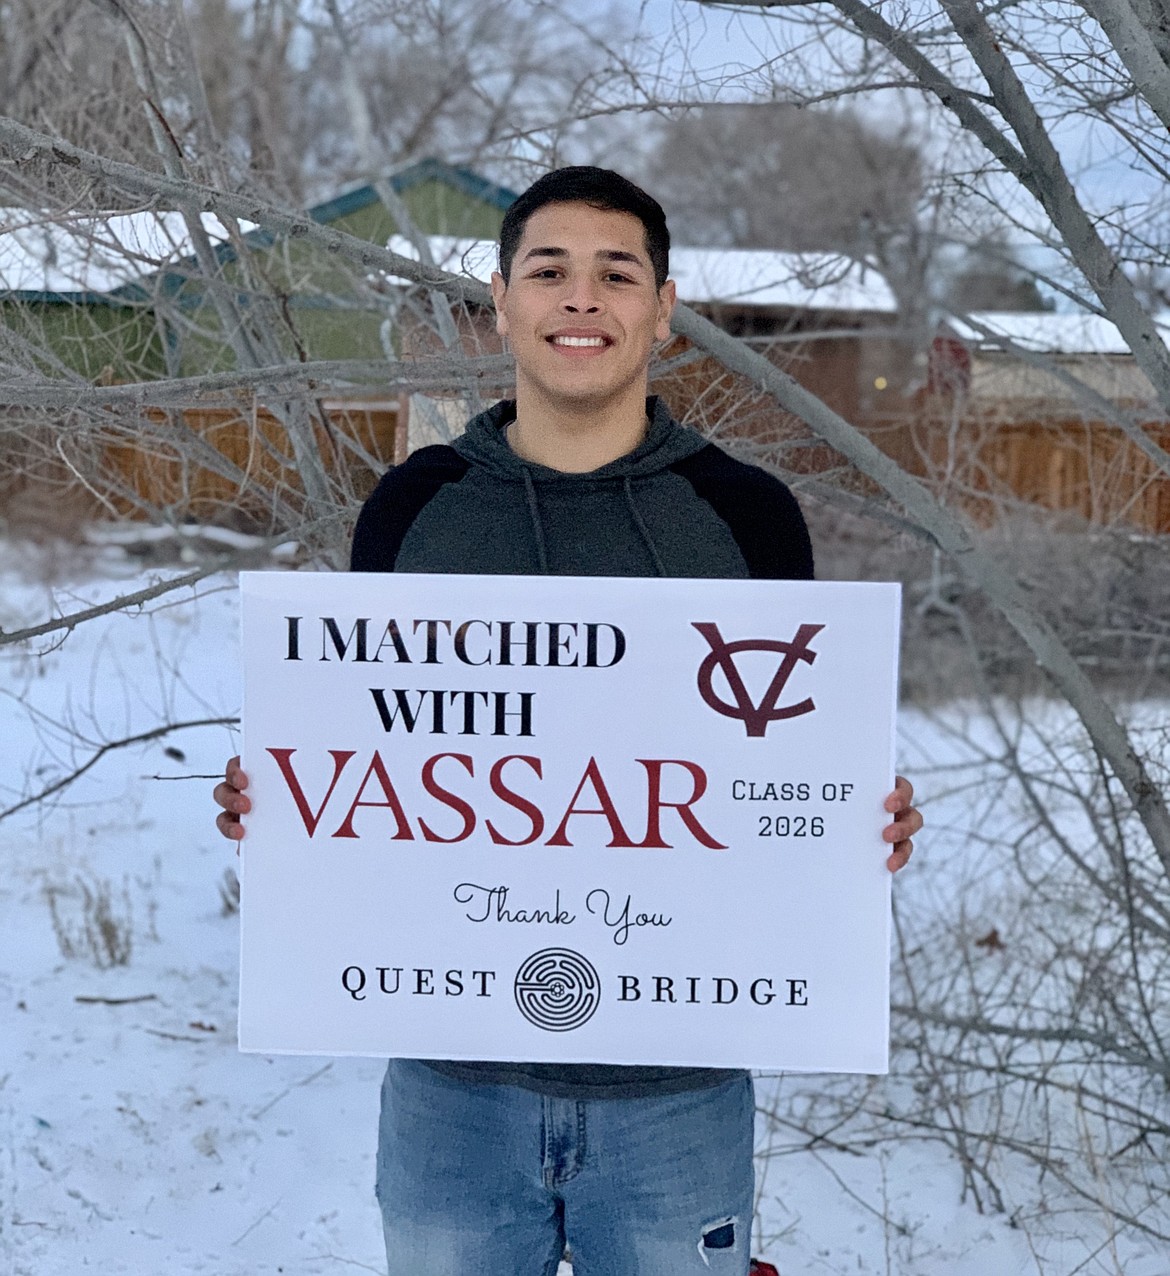 Moses Lake High School senior Samuel Rebuelta holds a sign announcing he “matched with Vassar.”